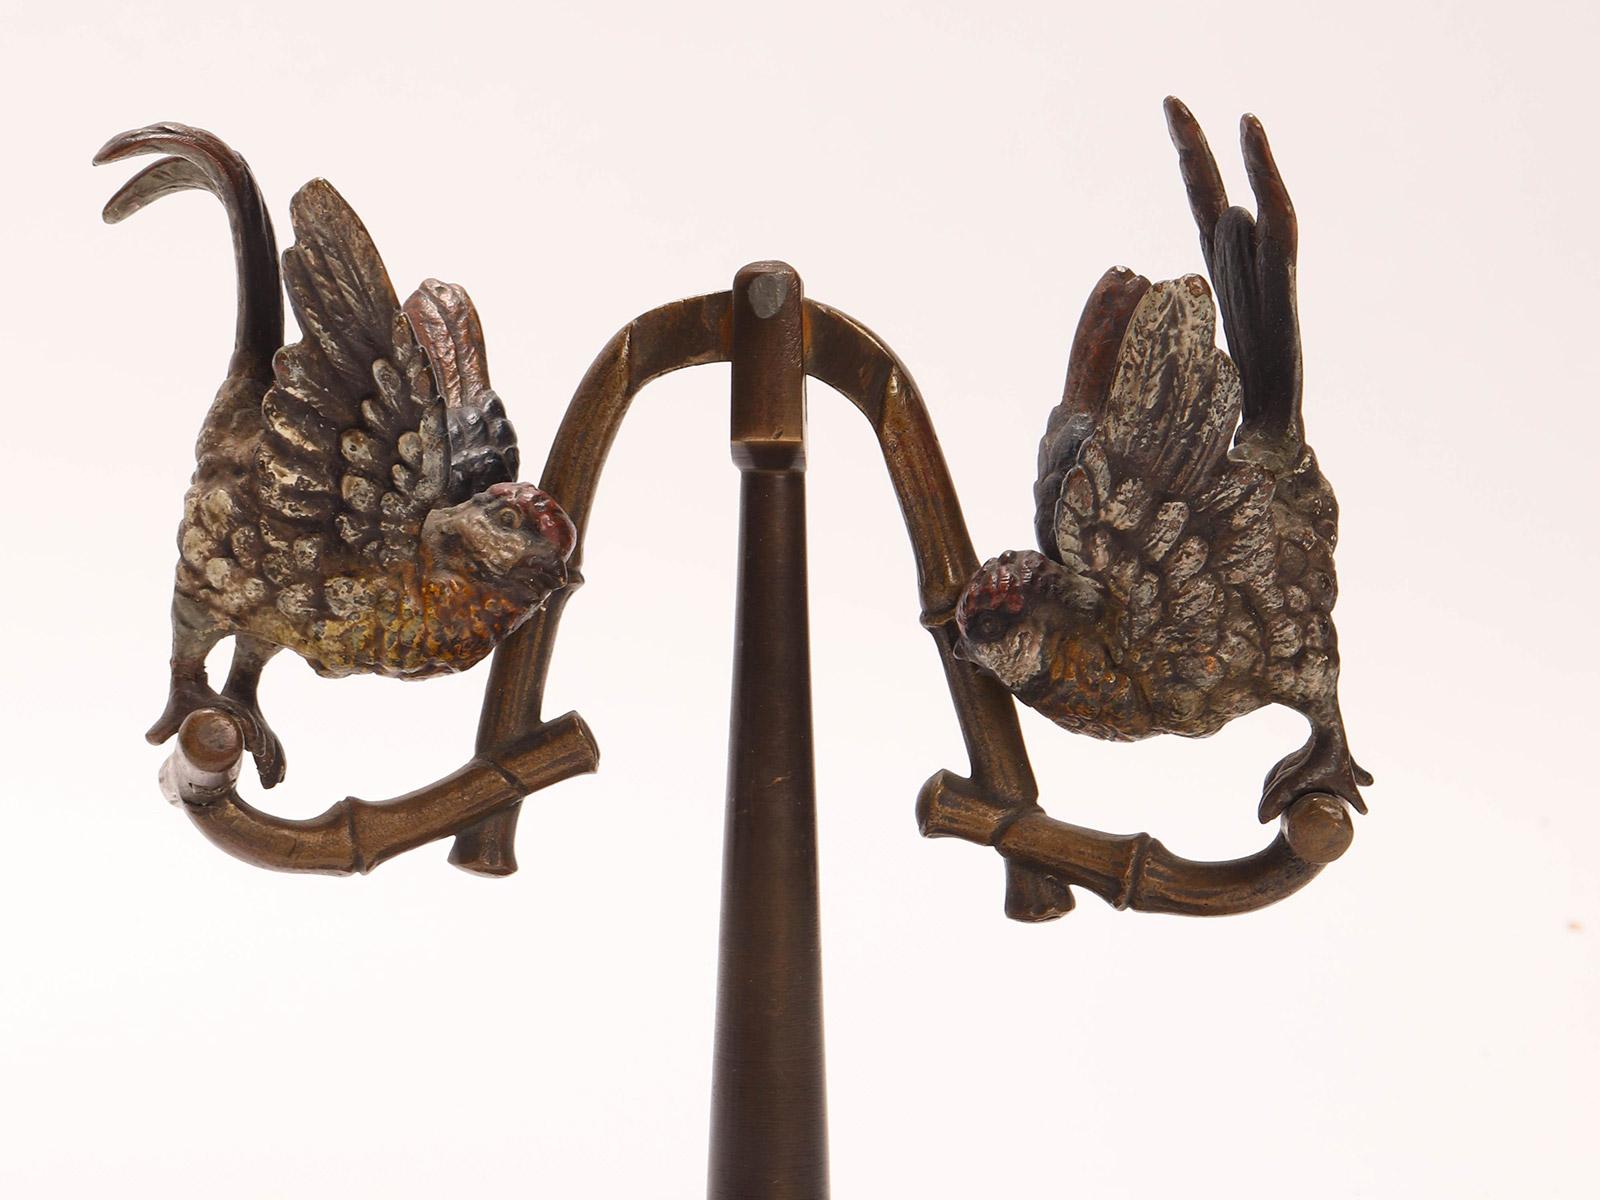 Wiener bronze swing with two parrots on a circular base. The parrots are painted in different colors. Reciprocating mechanism. Wien Austria 1890 ca.